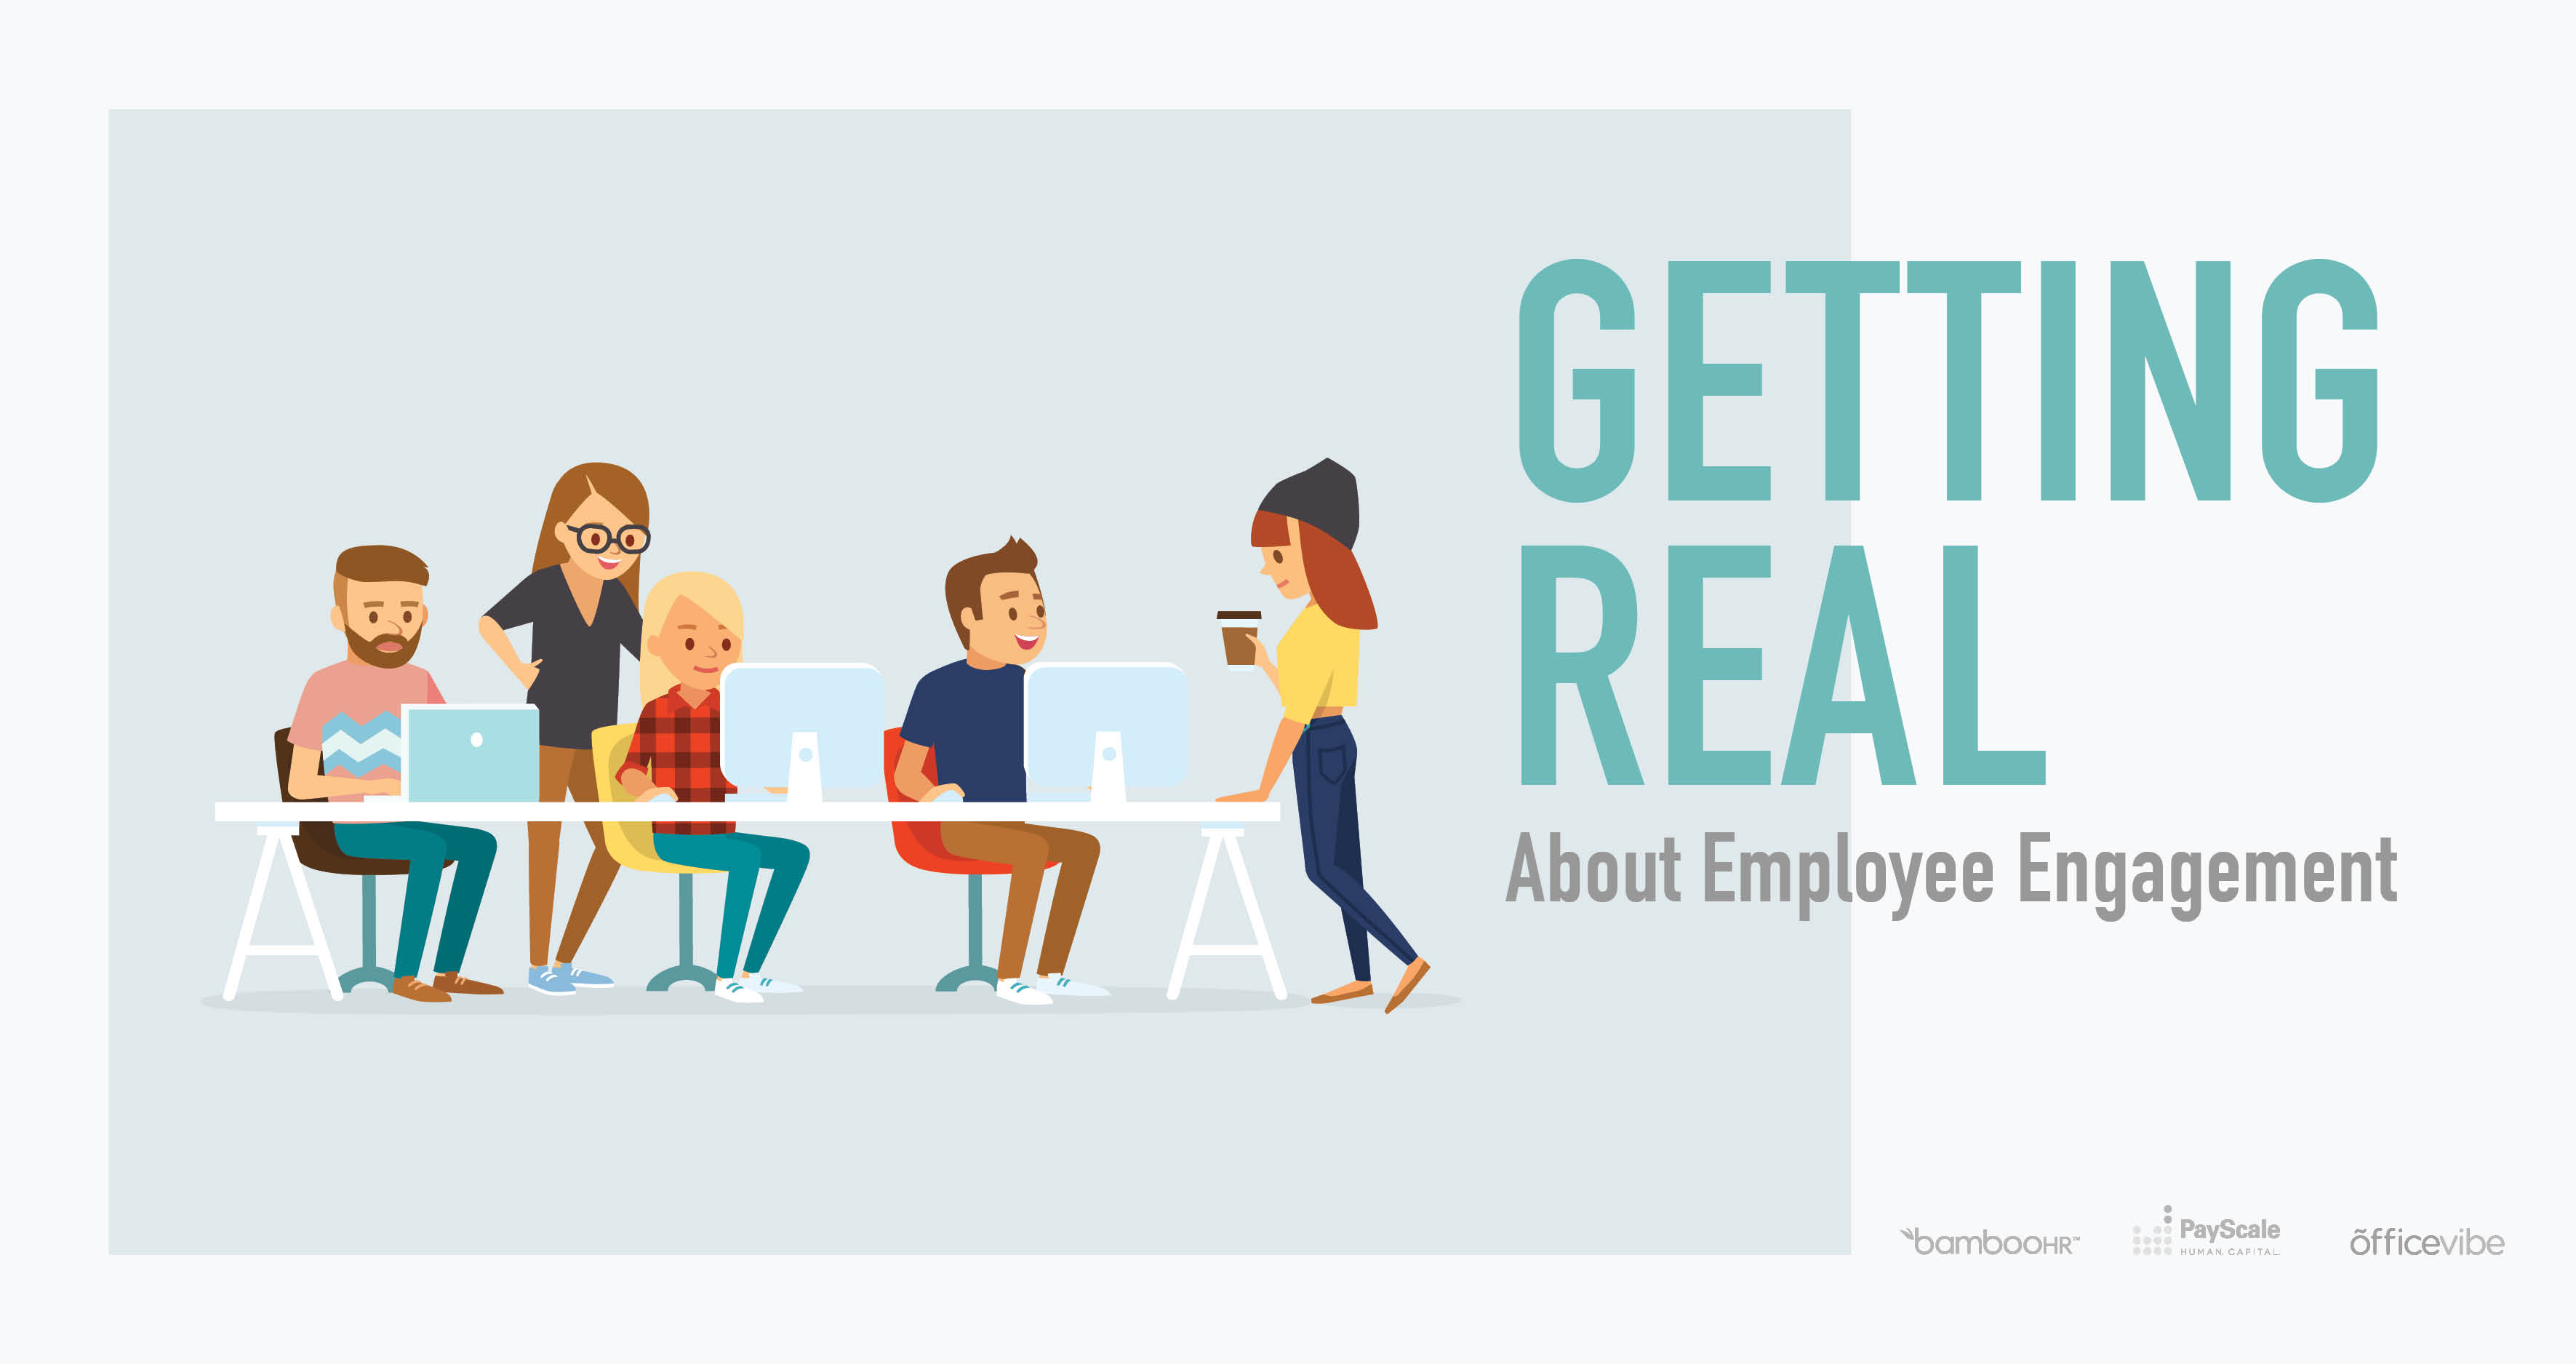 Getting Real About Employee Engagement: How to Get Started